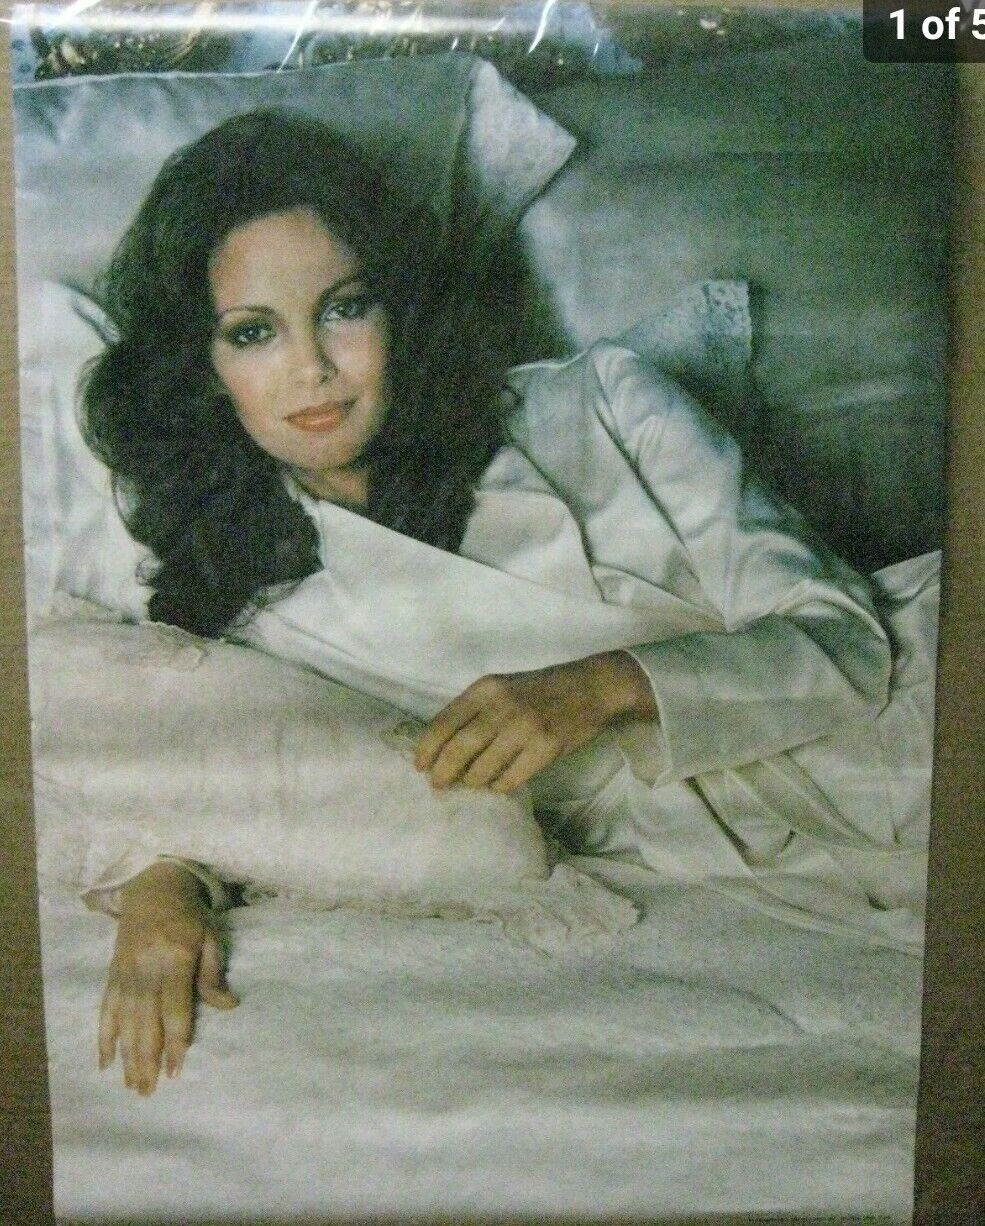 JACLYN SMITH 1977 CLASSIC BEAUTY SHOT VINTAGE FULL COLOR POSTER 20x28 NICE READ